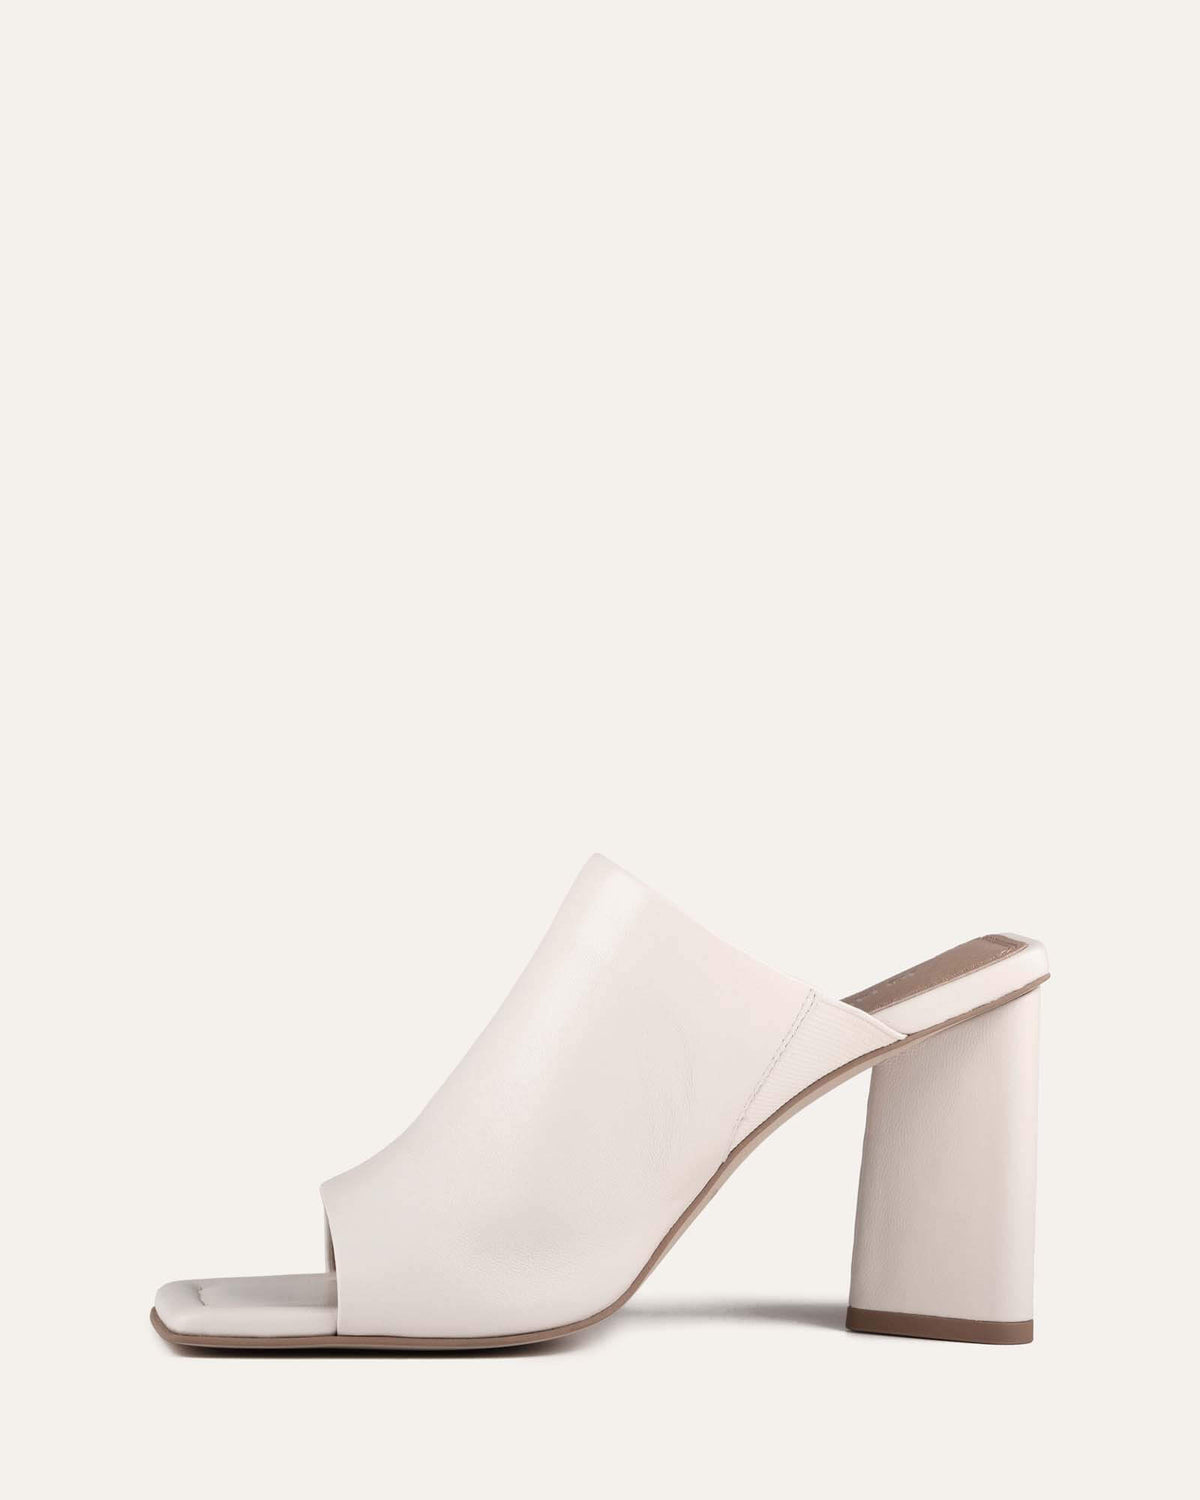 DANIELLE HIGH HEEL SANDALS OFF WHITE LEATHER